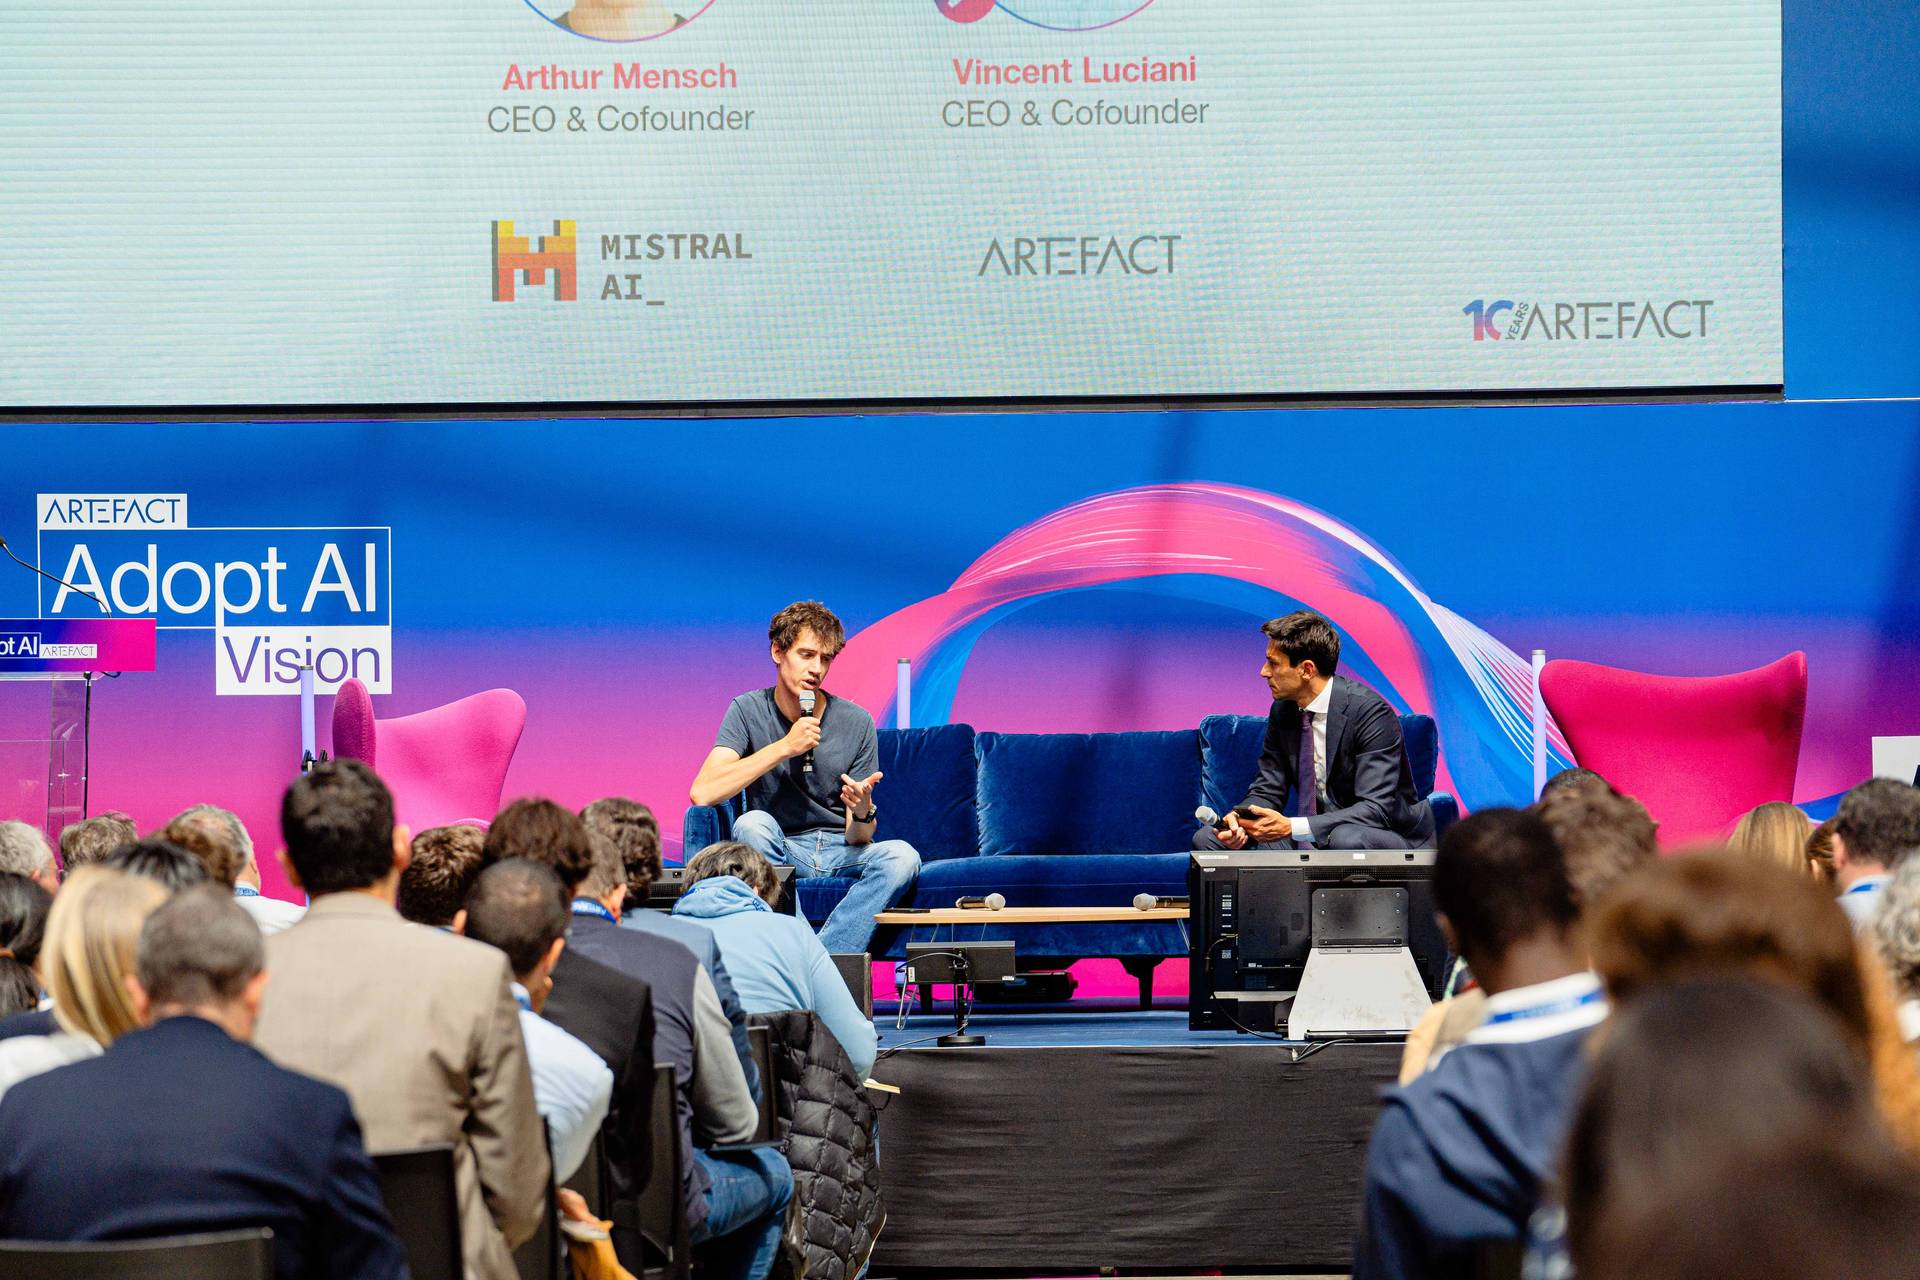 Arthur Mensch, CEO and cofounder of MISTRAL AI at the Adopt AI Summit – Bringing open AI models to the frontier